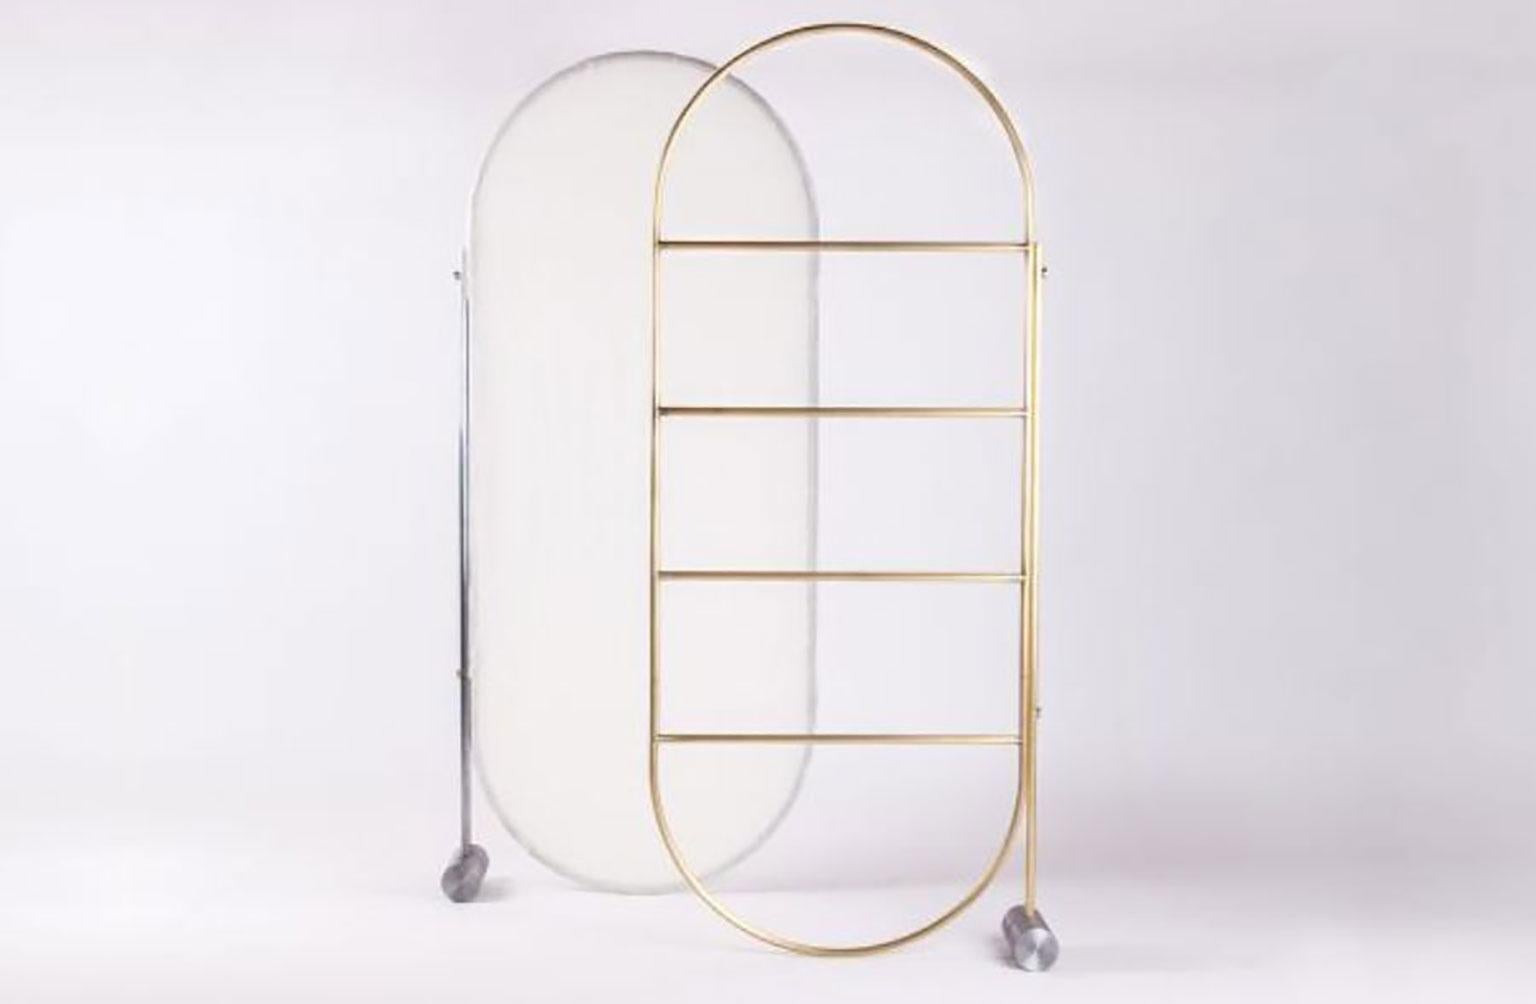 Separé eoom divider by Omri Revesz & Damian Tatangelo for Mingardo. Separè is a multi-use room divider, created with a metal frame that stands out visually and geometrically with a tubular weight that works as a foundation. Separè is formed of